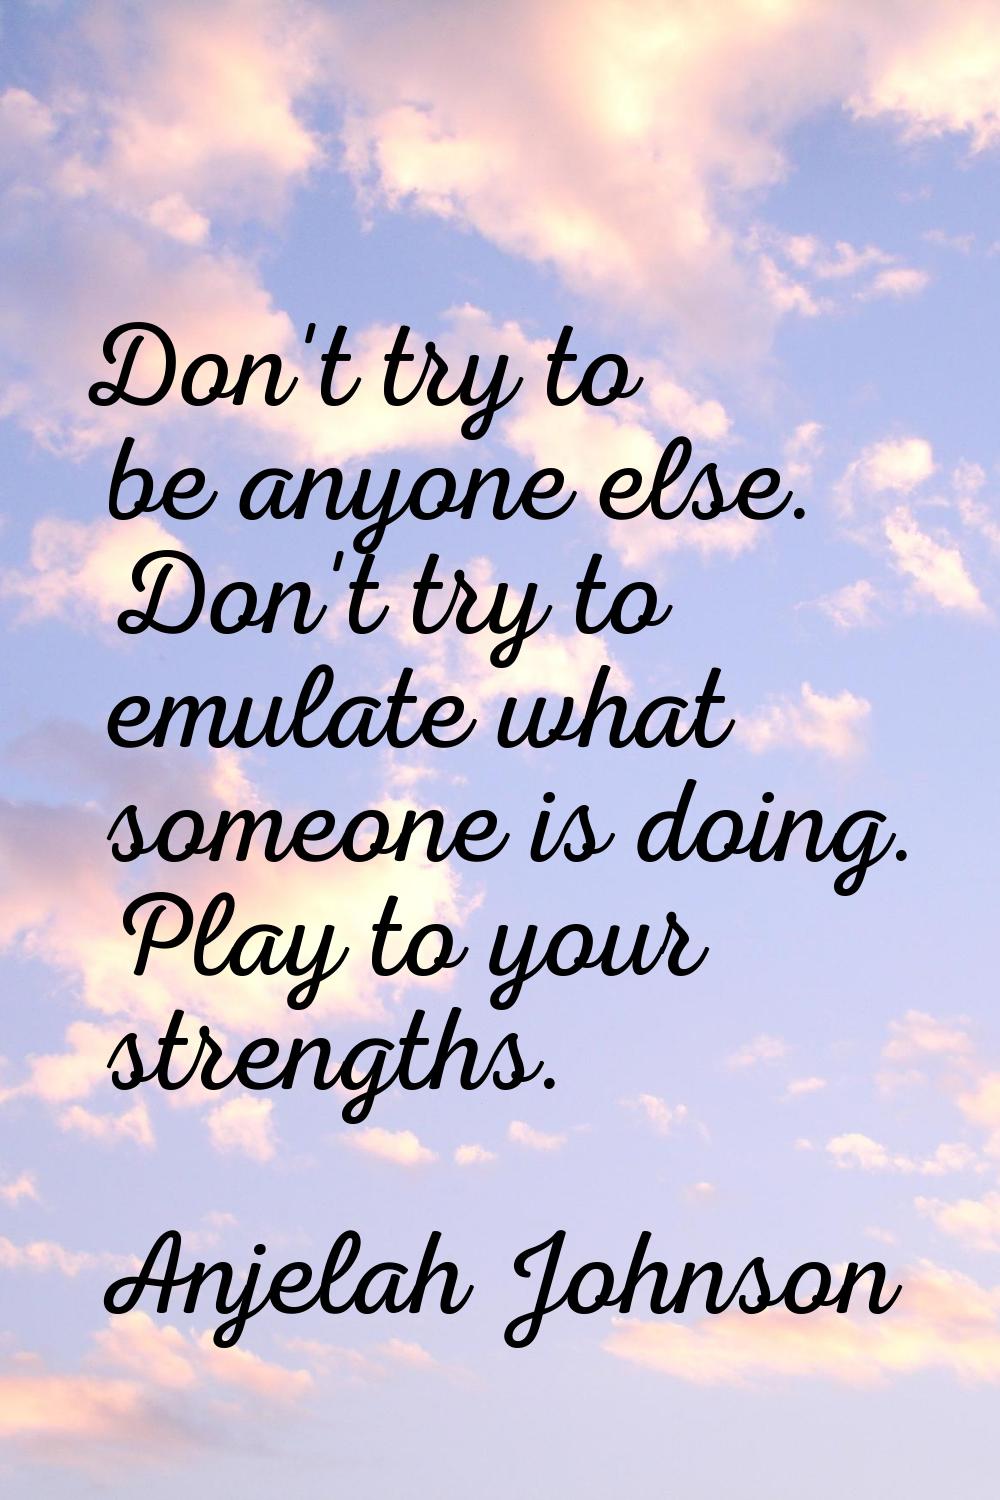 Don't try to be anyone else. Don't try to emulate what someone is doing. Play to your strengths.